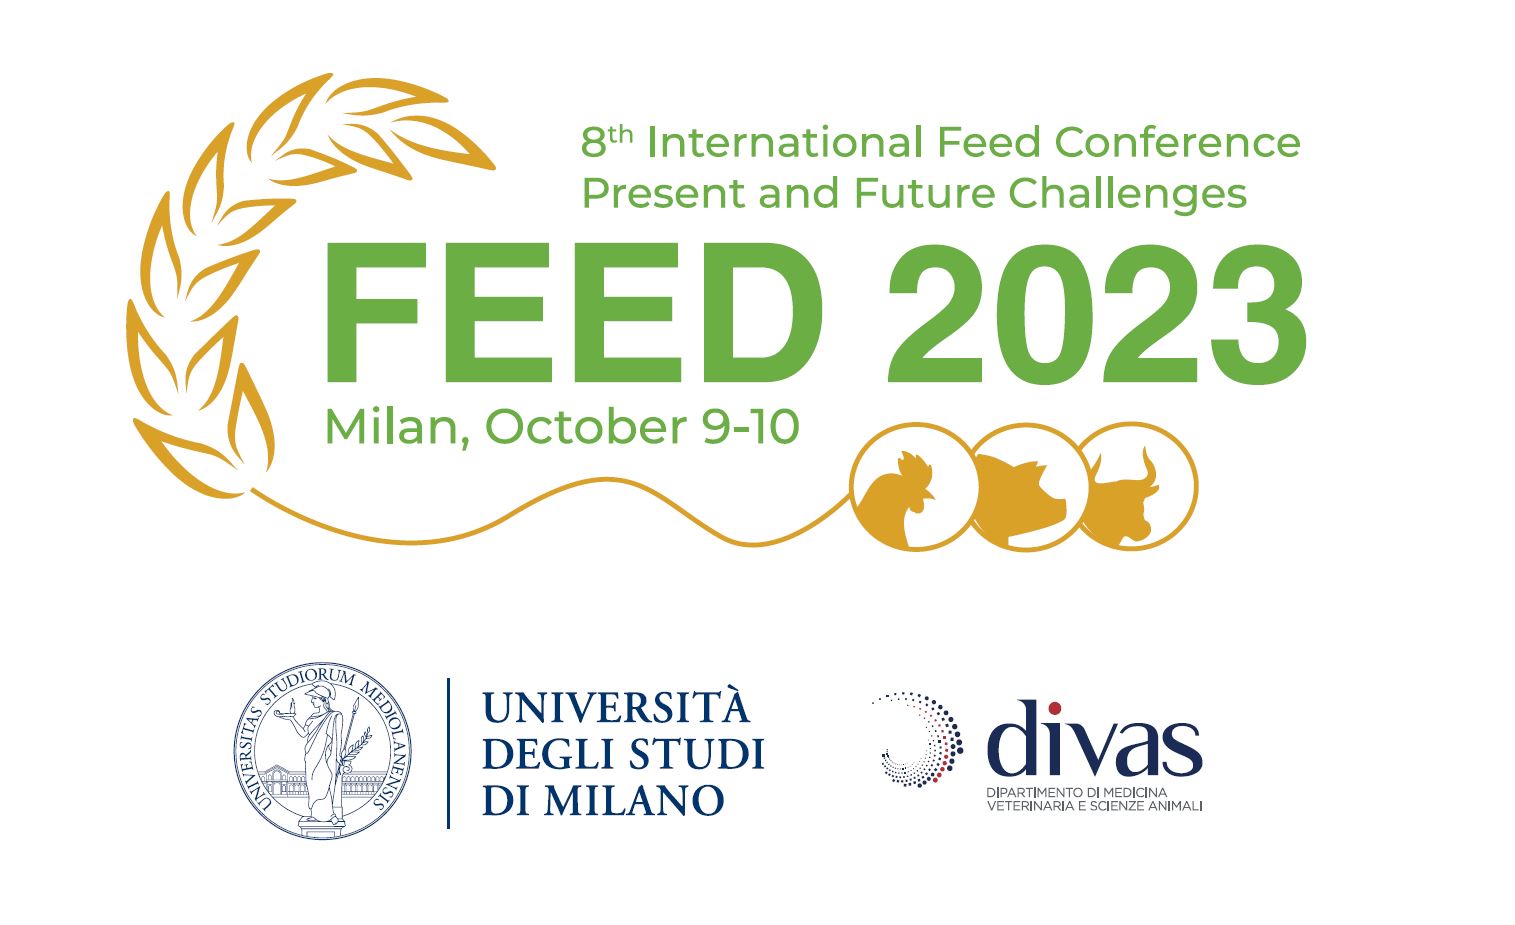 Sevecom proudly sponsored the 8th International Feed Conference